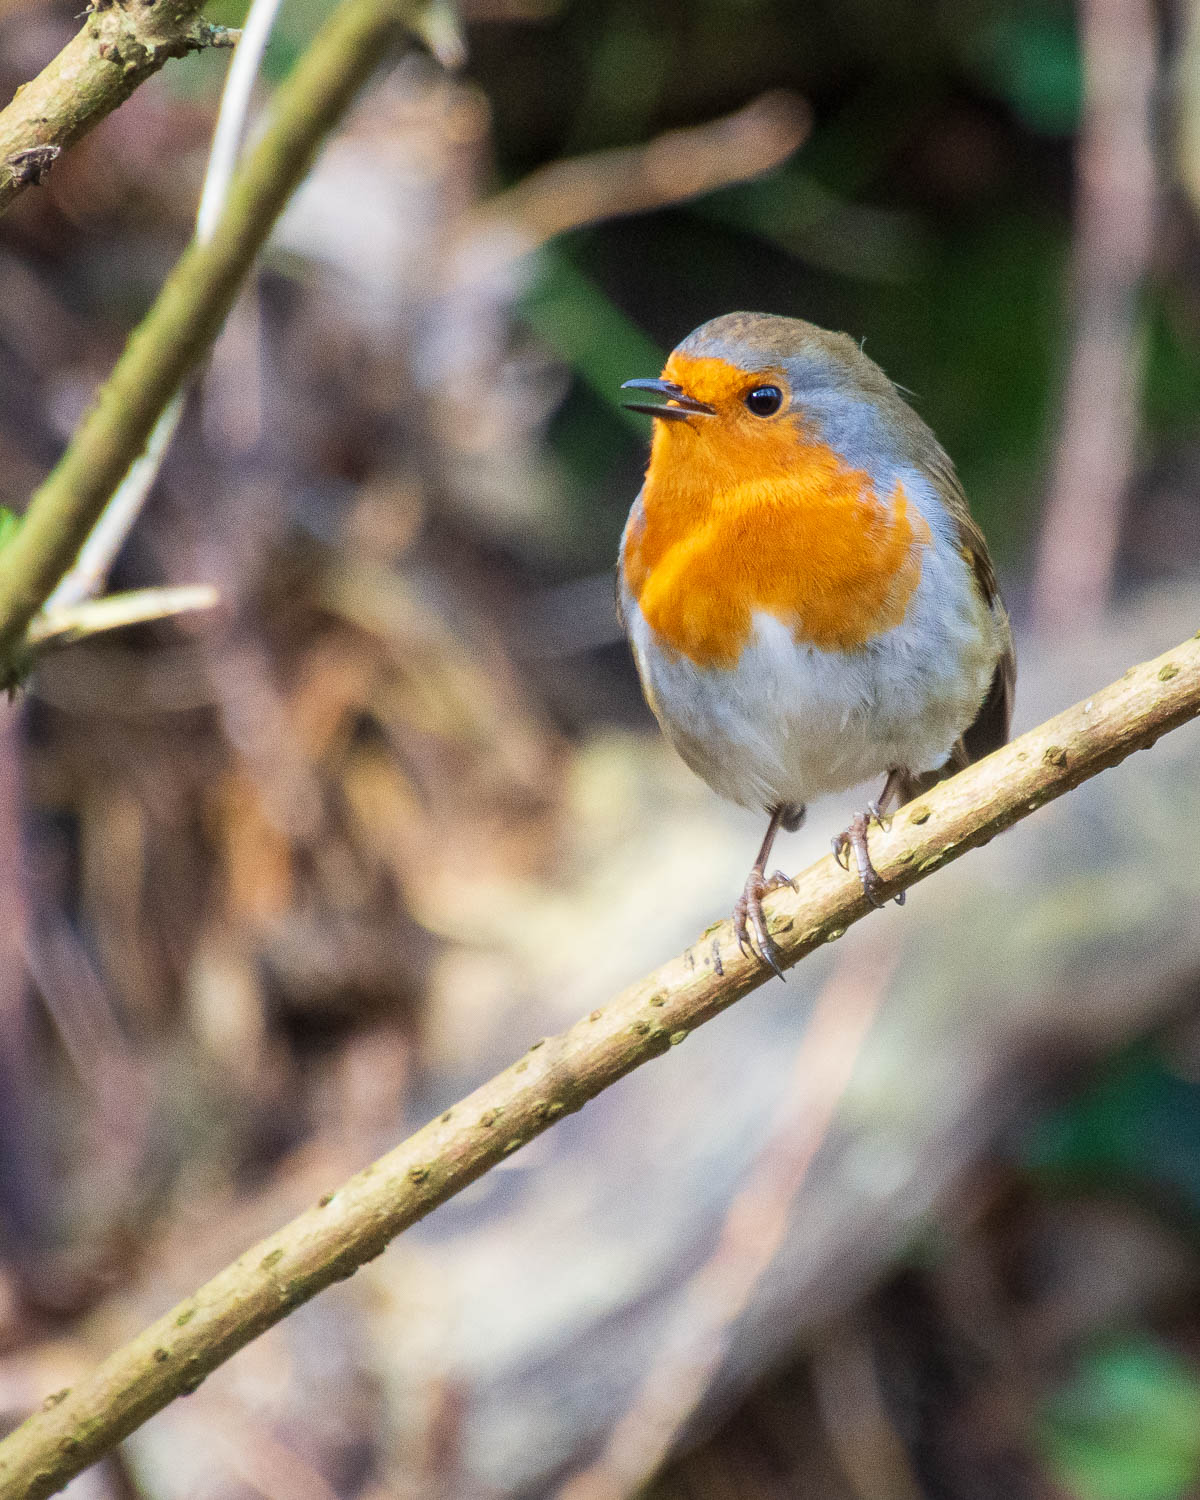 Robin standing on a branch.